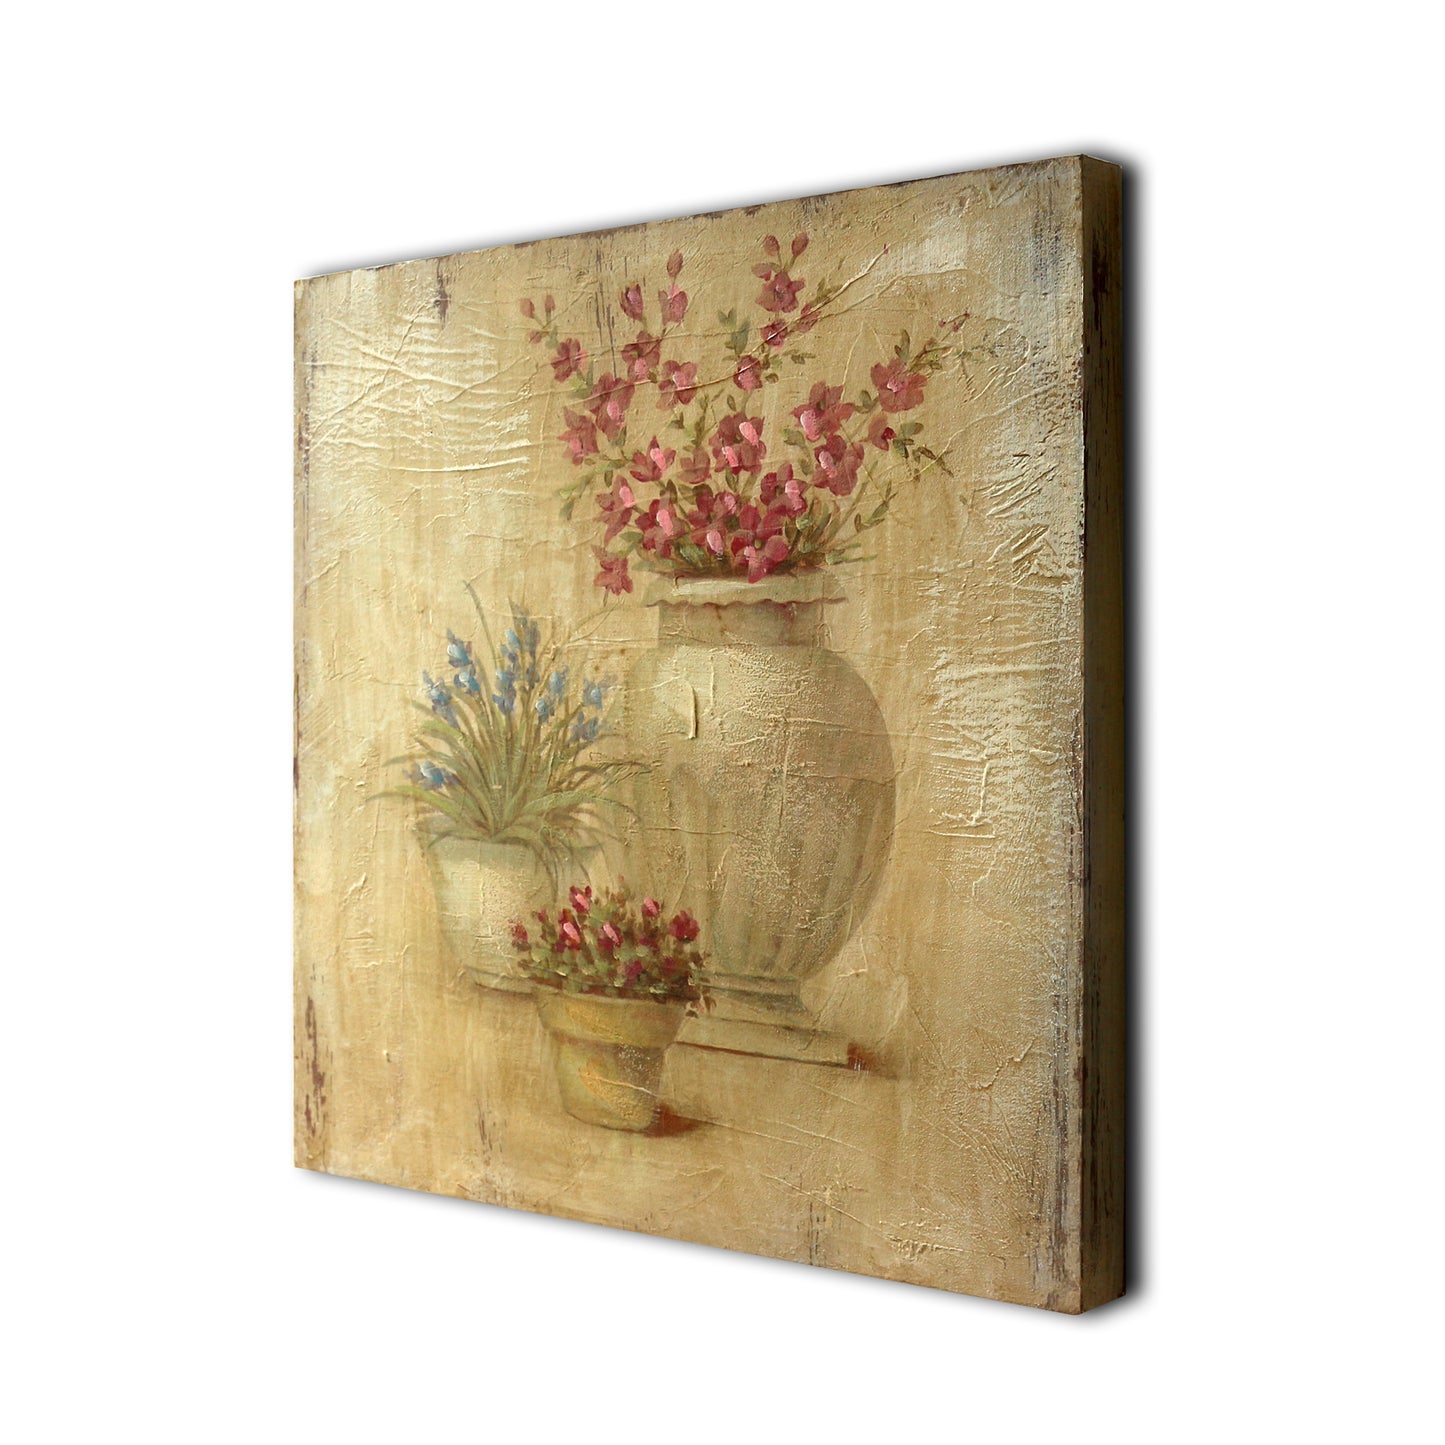 CVHOMEDECO. Rustic Vintage Hand Painted Wooden Frame Wall Hanging 3D Painting Decoration Art, Flower in Planter Design, 15 x 15 Inch